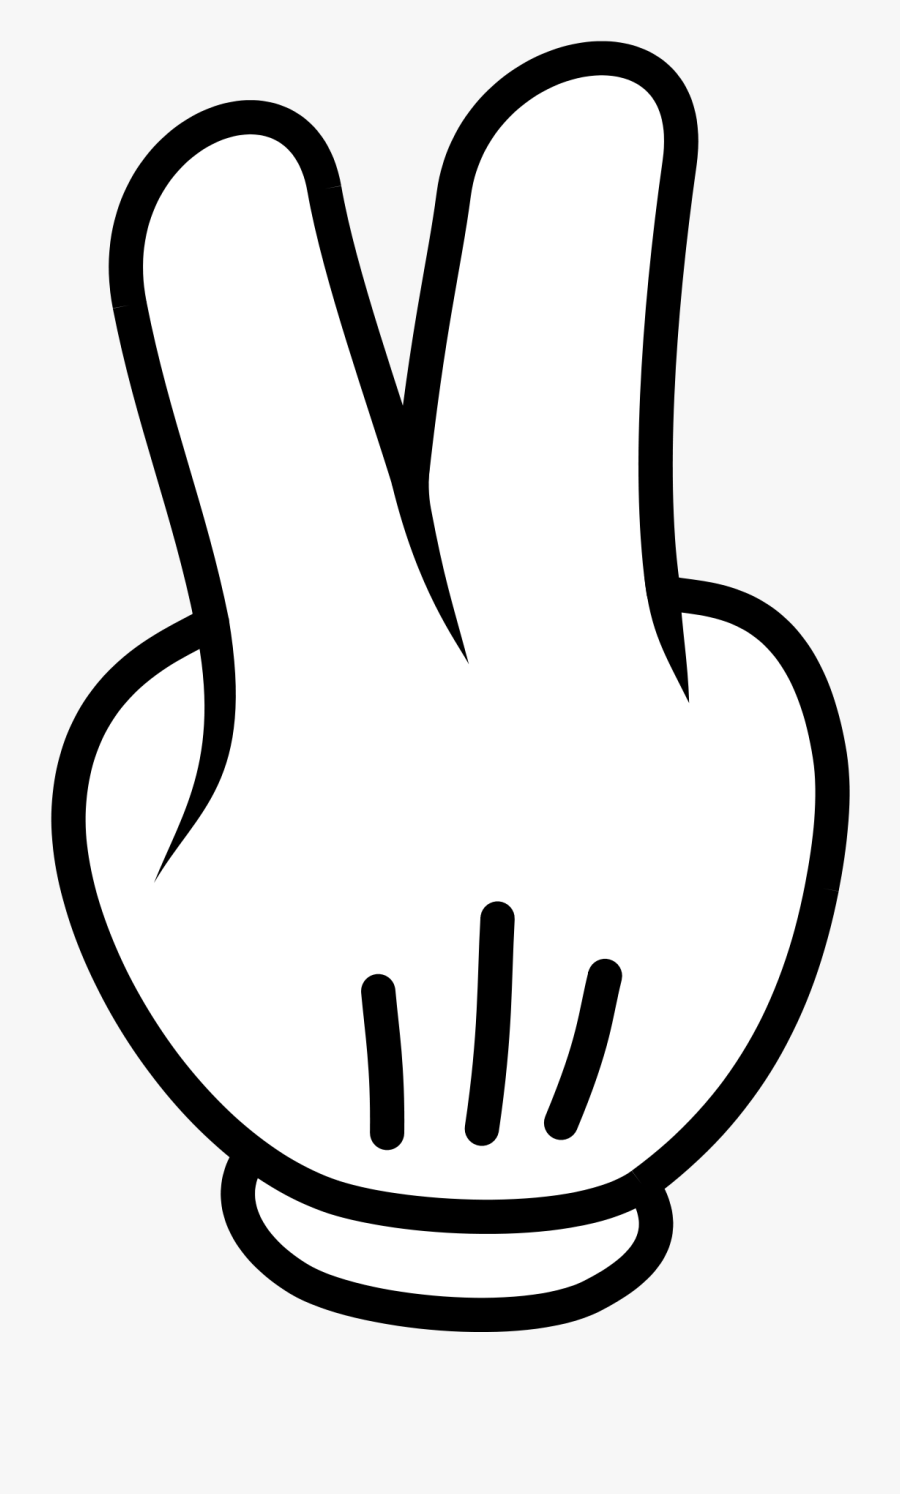 Clip Art Middle Finger Hd Photos Clipart - Mickey Mouse 3 Fingers, Transparent Clipart